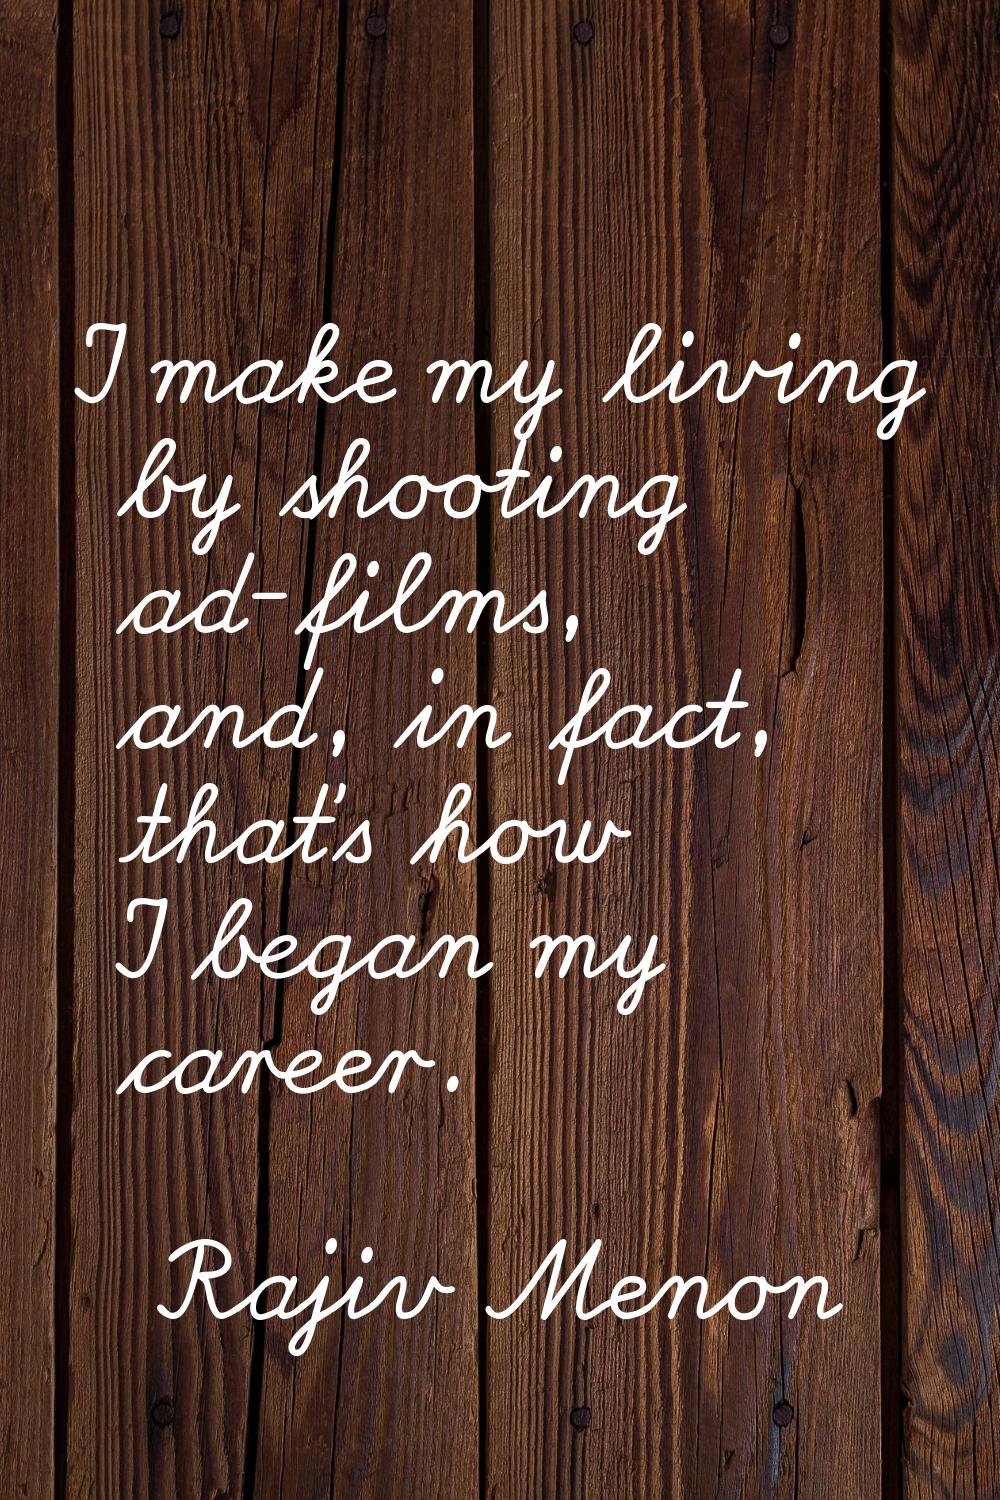 I make my living by shooting ad-films, and, in fact, that's how I began my career.